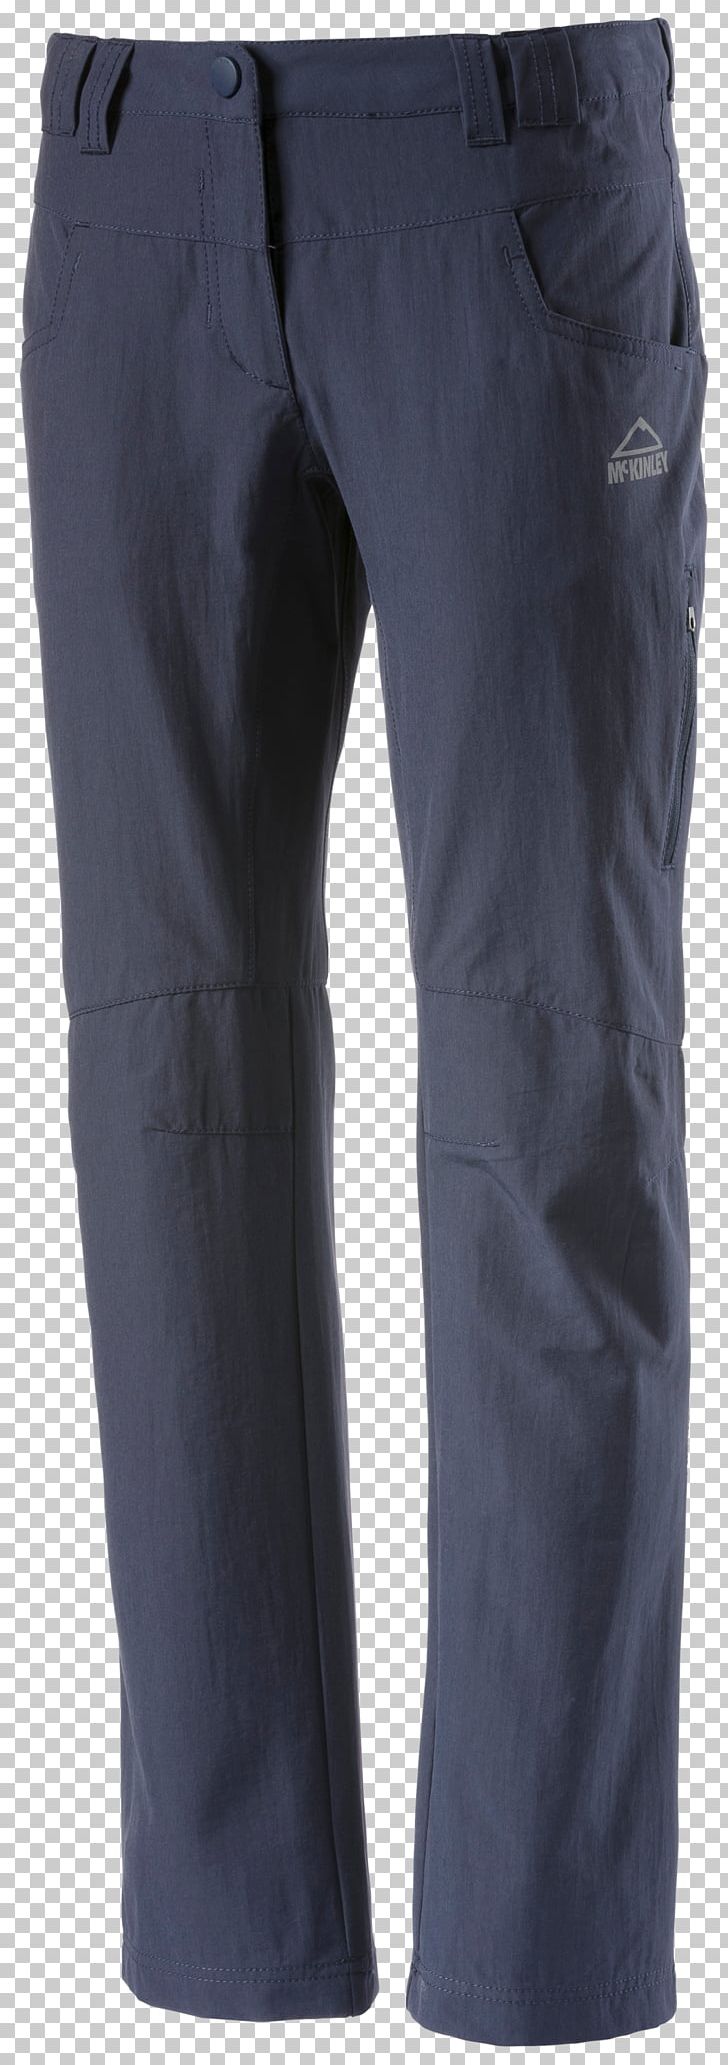 Pants Columbia Sportswear Clothing Discounts And Allowances Женская одежда PNG, Clipart, Active Pants, Armani, Clothing, Columbia Sportswear, Denim Free PNG Download